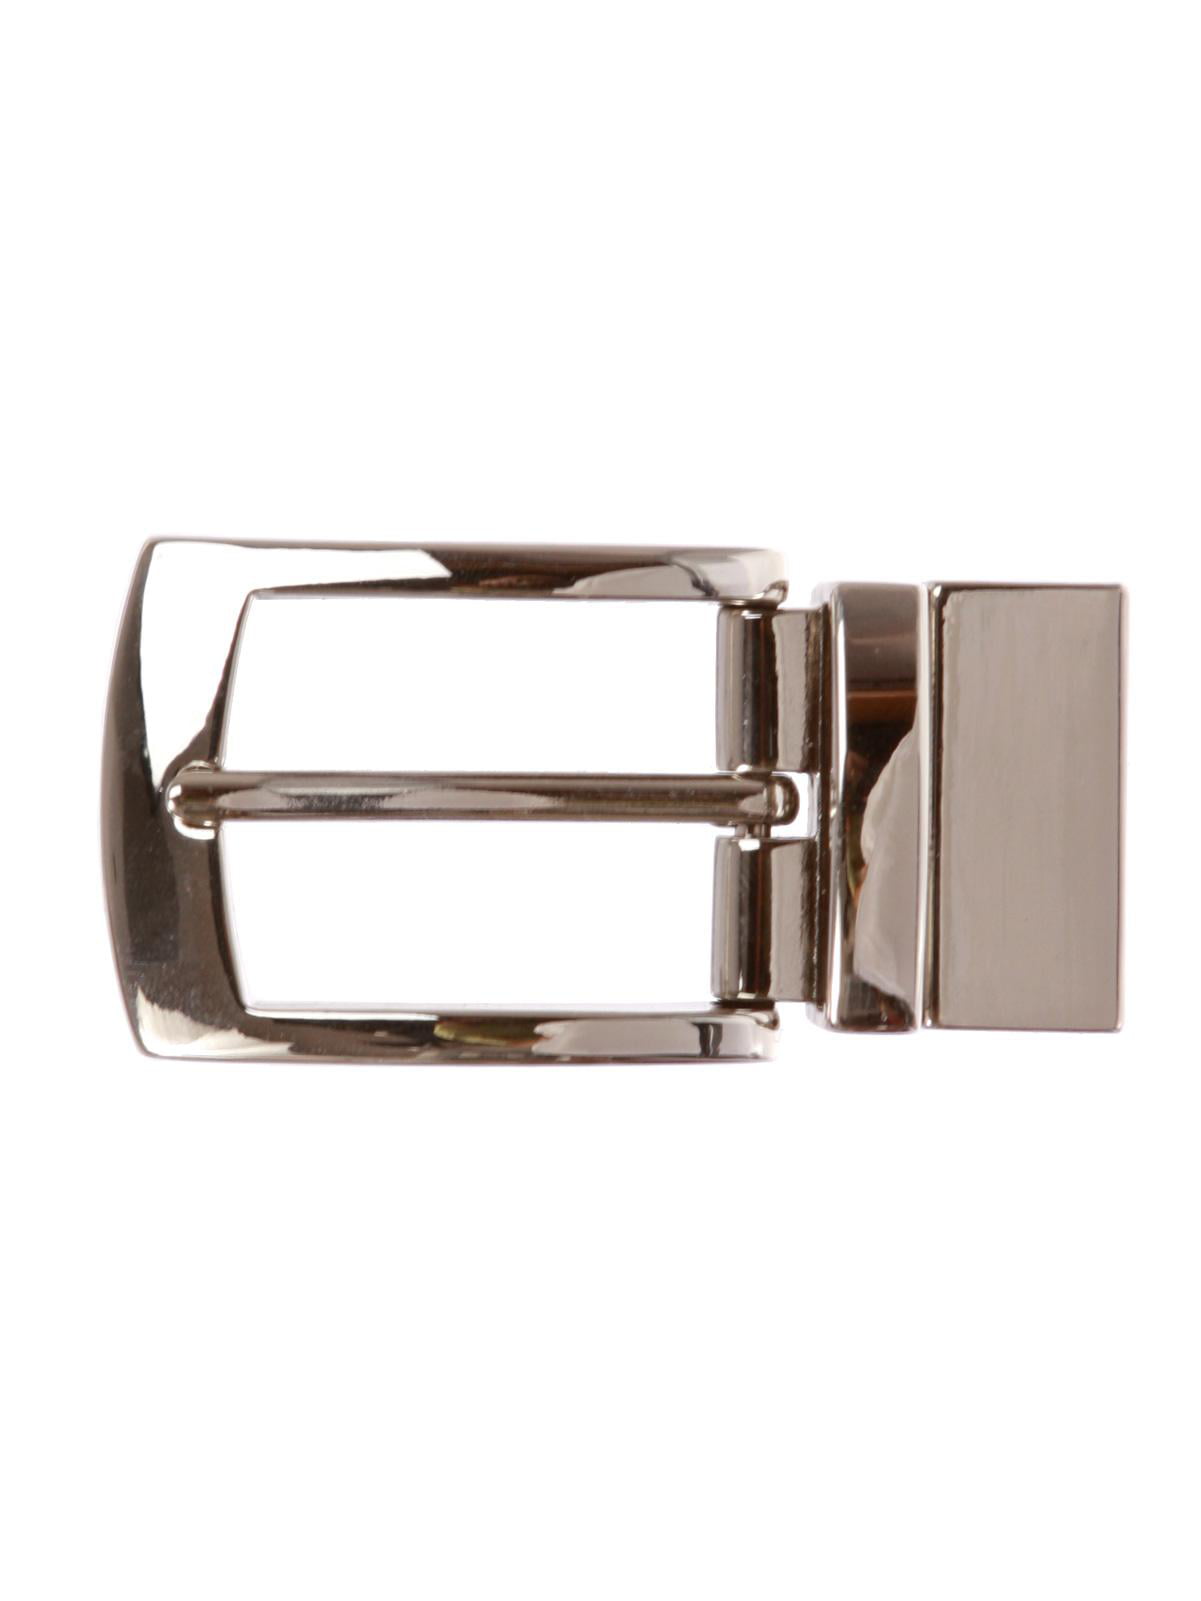 Eye Chart Novelty IF YOU CAN READ THIS Metal Belt Buckle